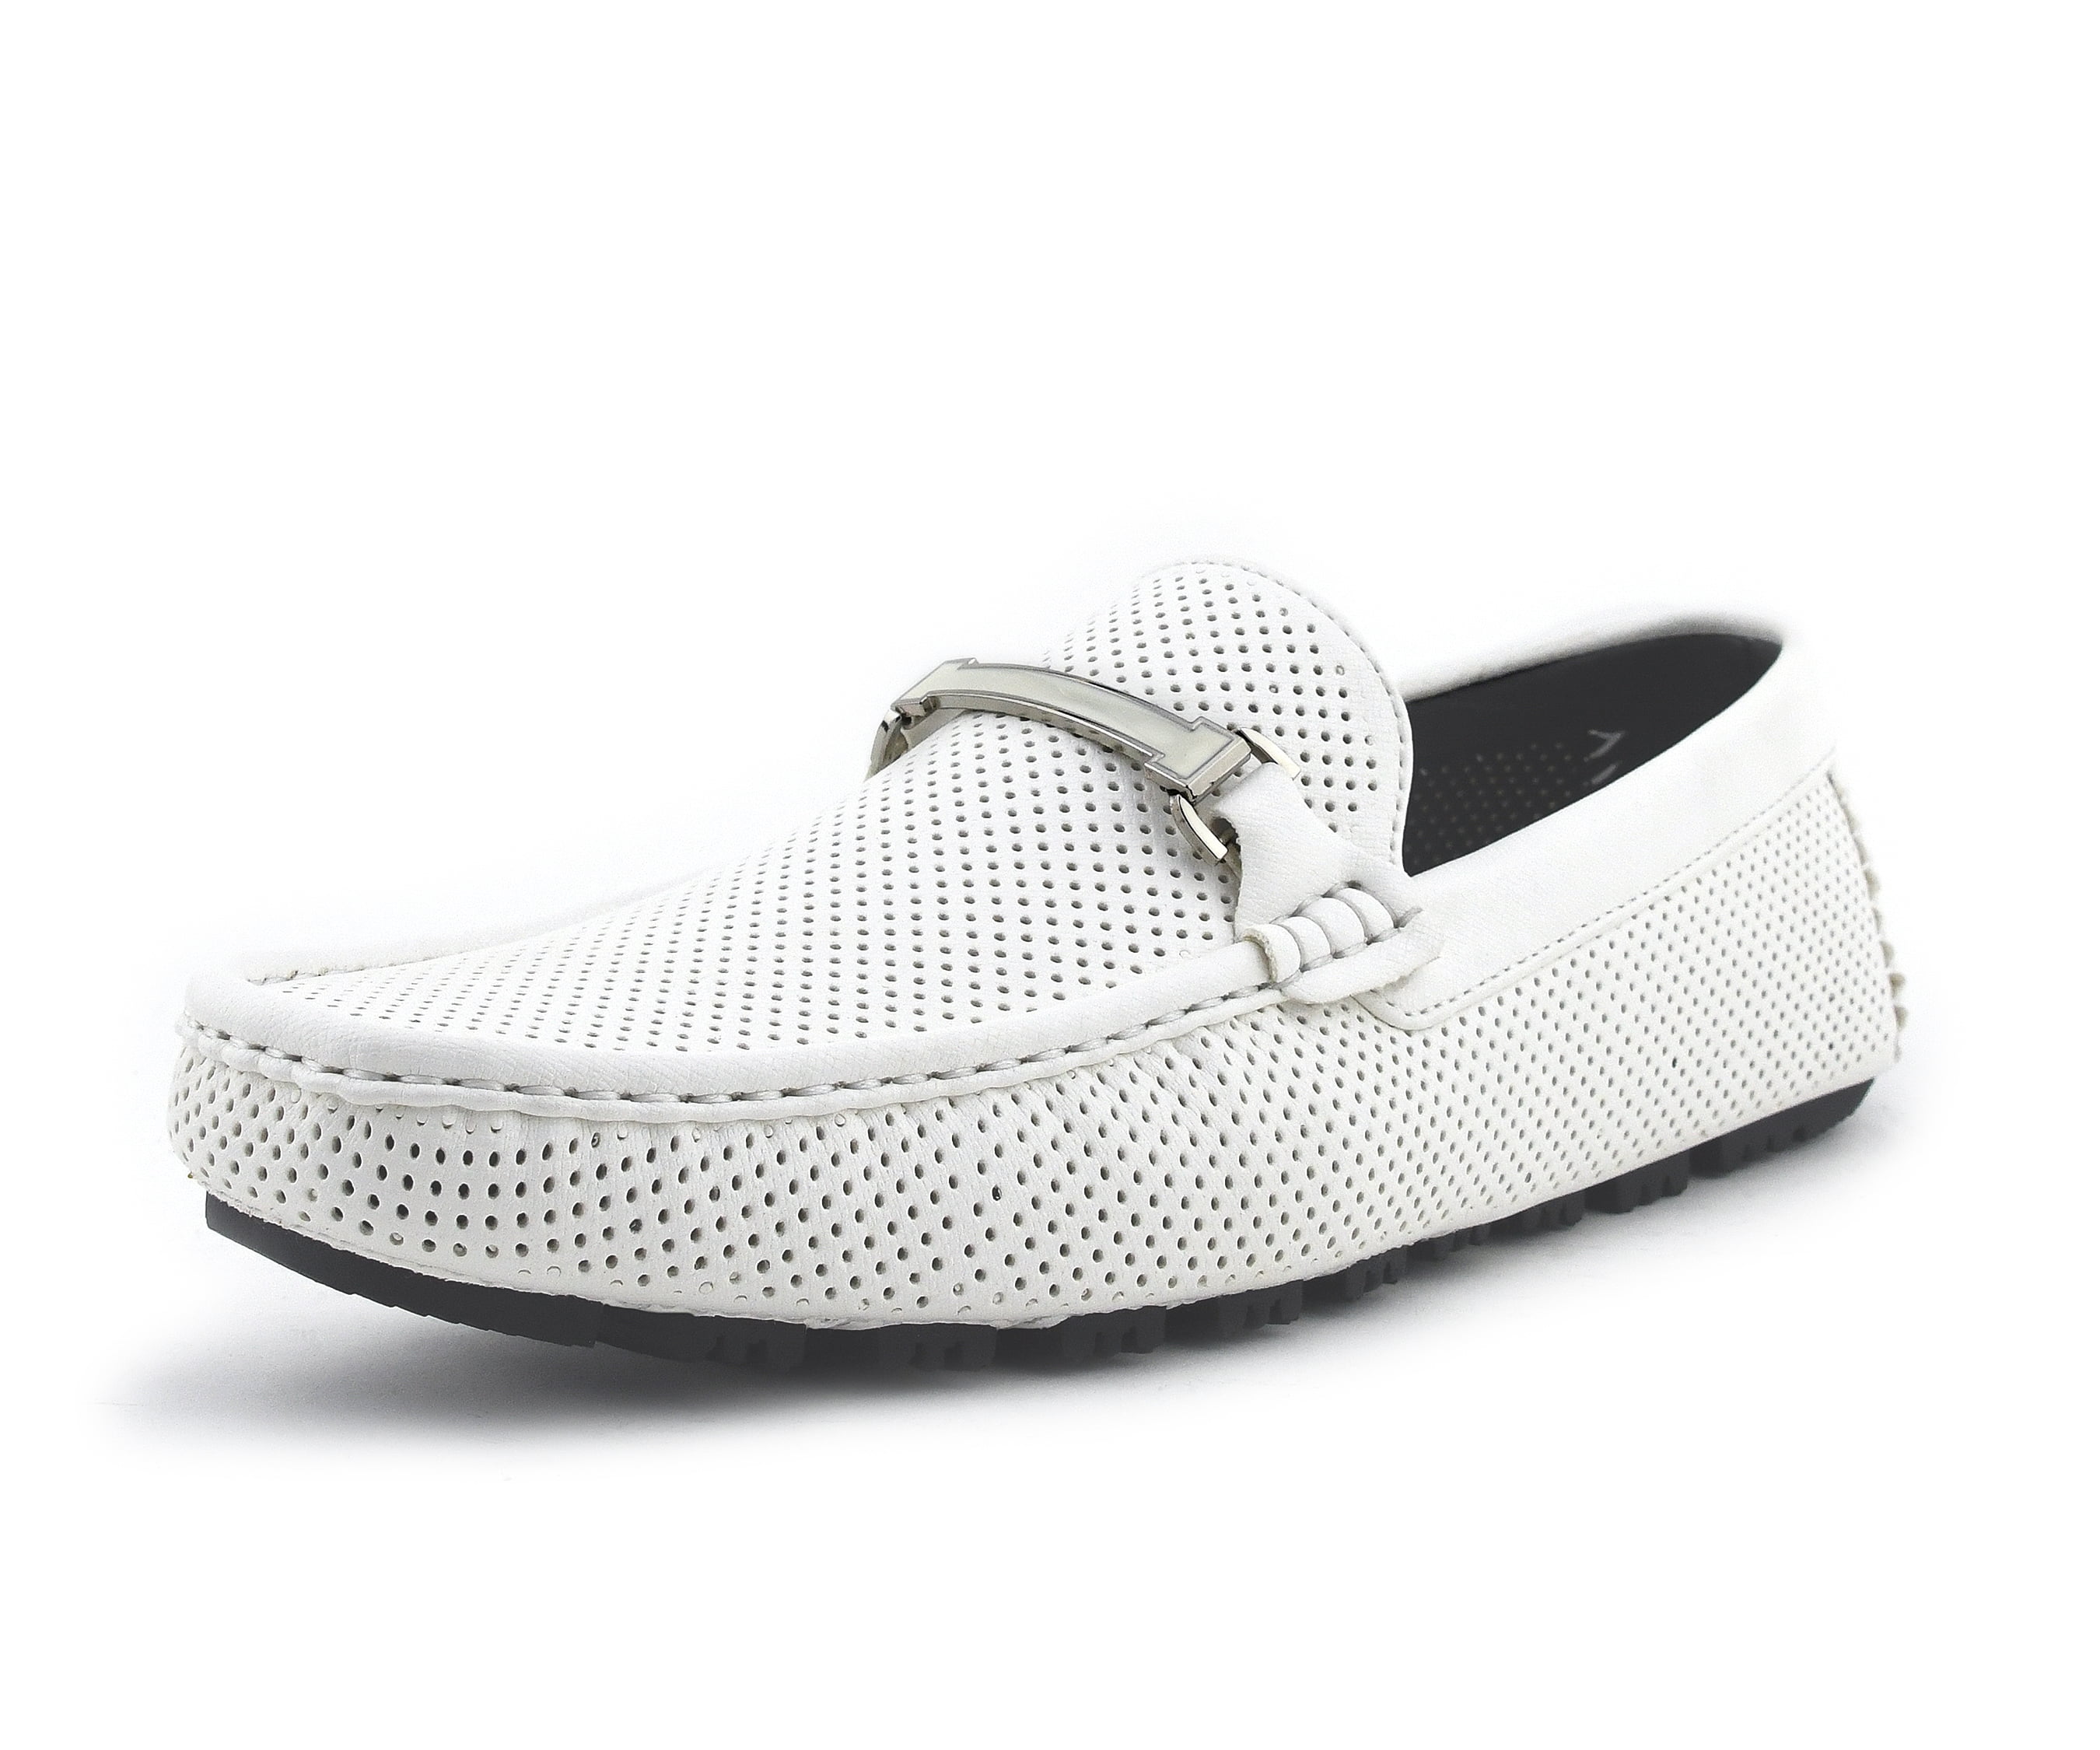 Amali Mens Slip On Driving Moccasin Casual Loafers Dress Shoes White ...